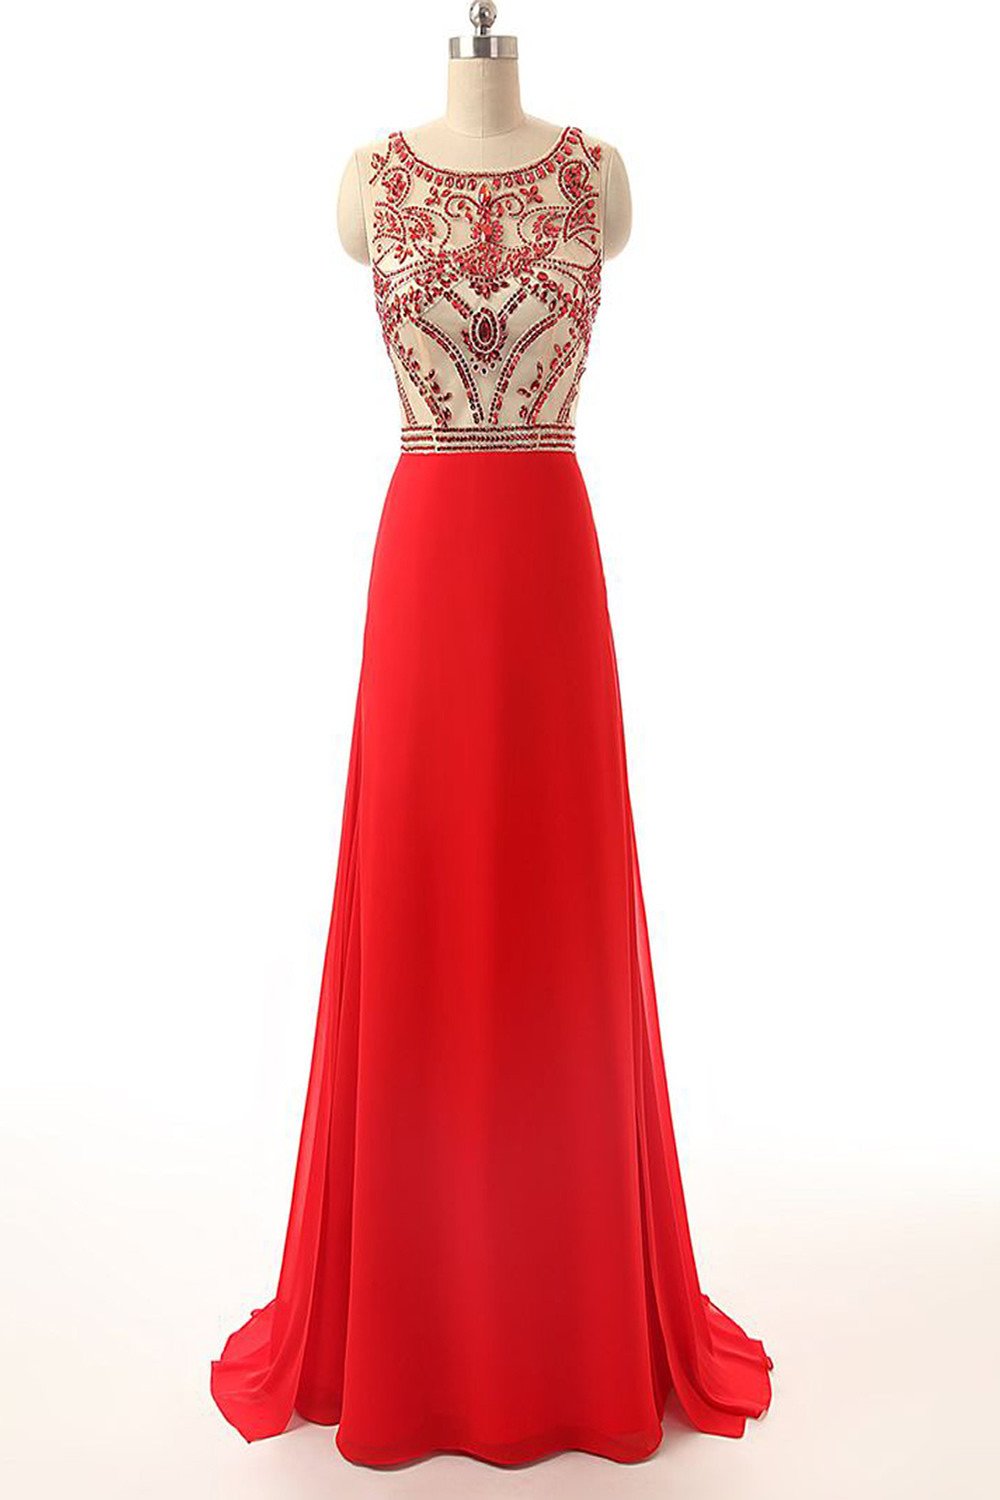 Beaded Long Prom Dress Red Chiffon Cheap Evening Gowns ED0712